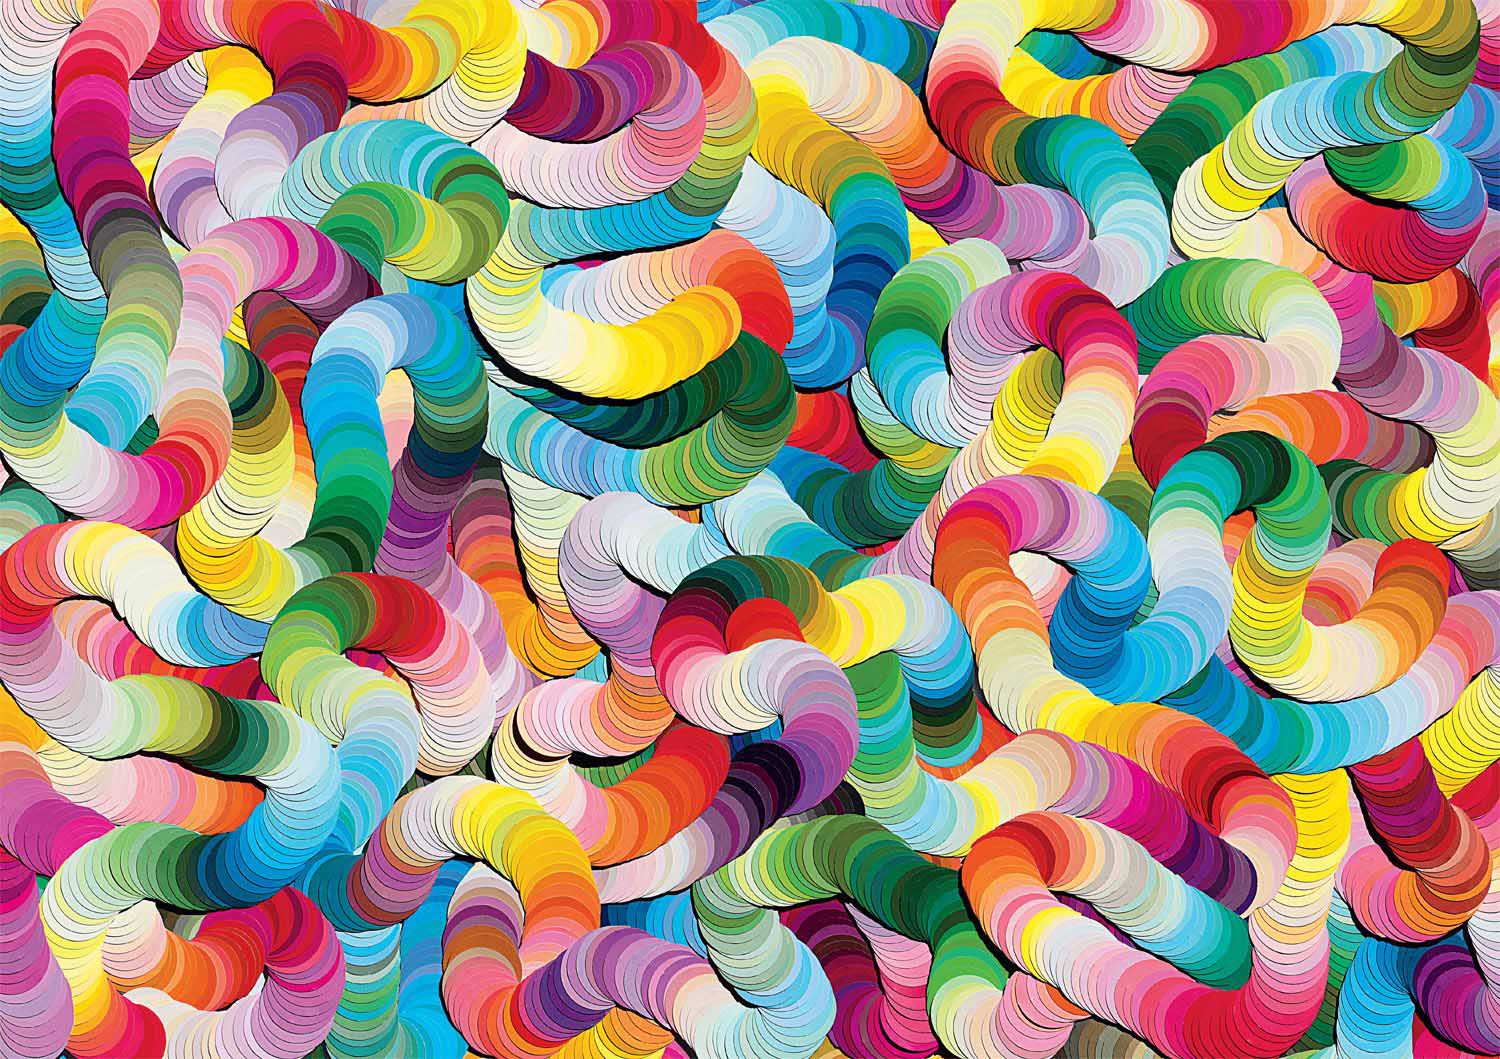 Slither Graphics / Illustration Jigsaw Puzzle